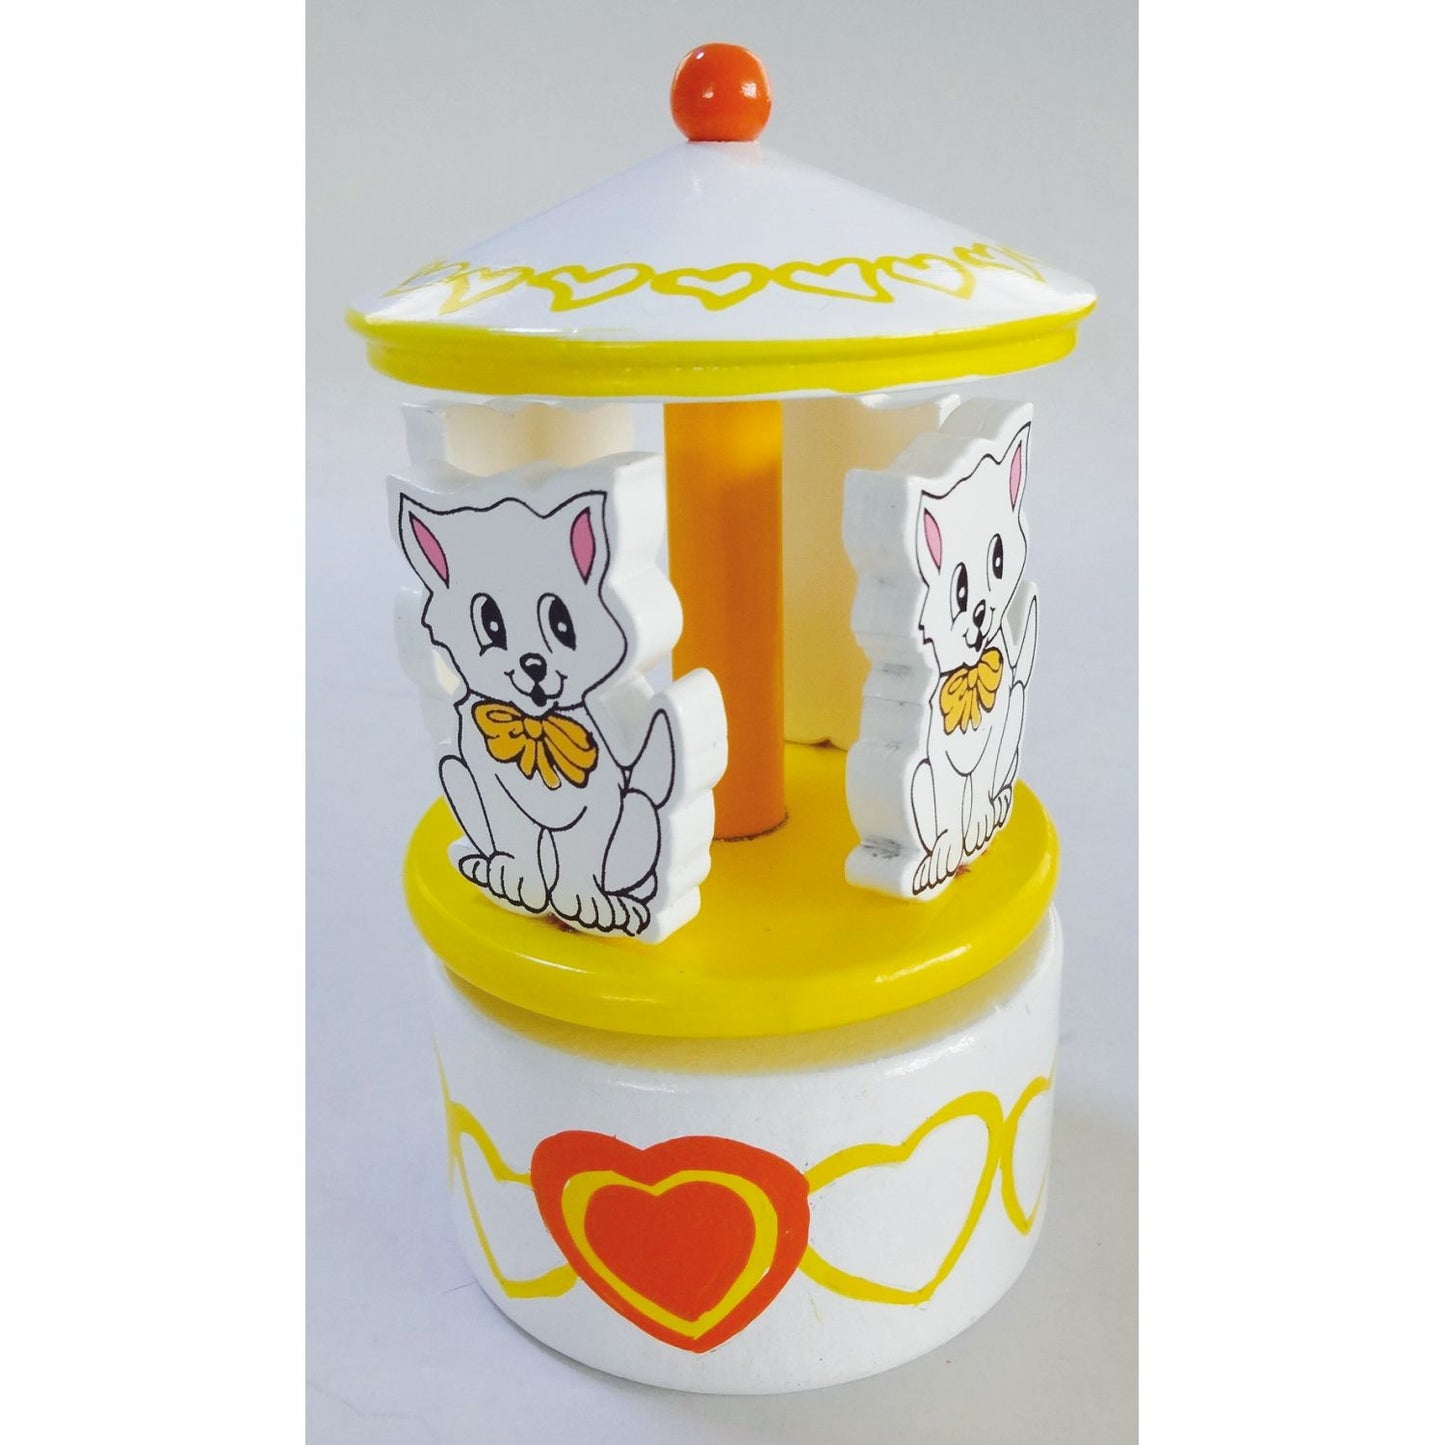 Musicbox Kingdom 5.9" Cat Carousel Turns To A Famous Melody